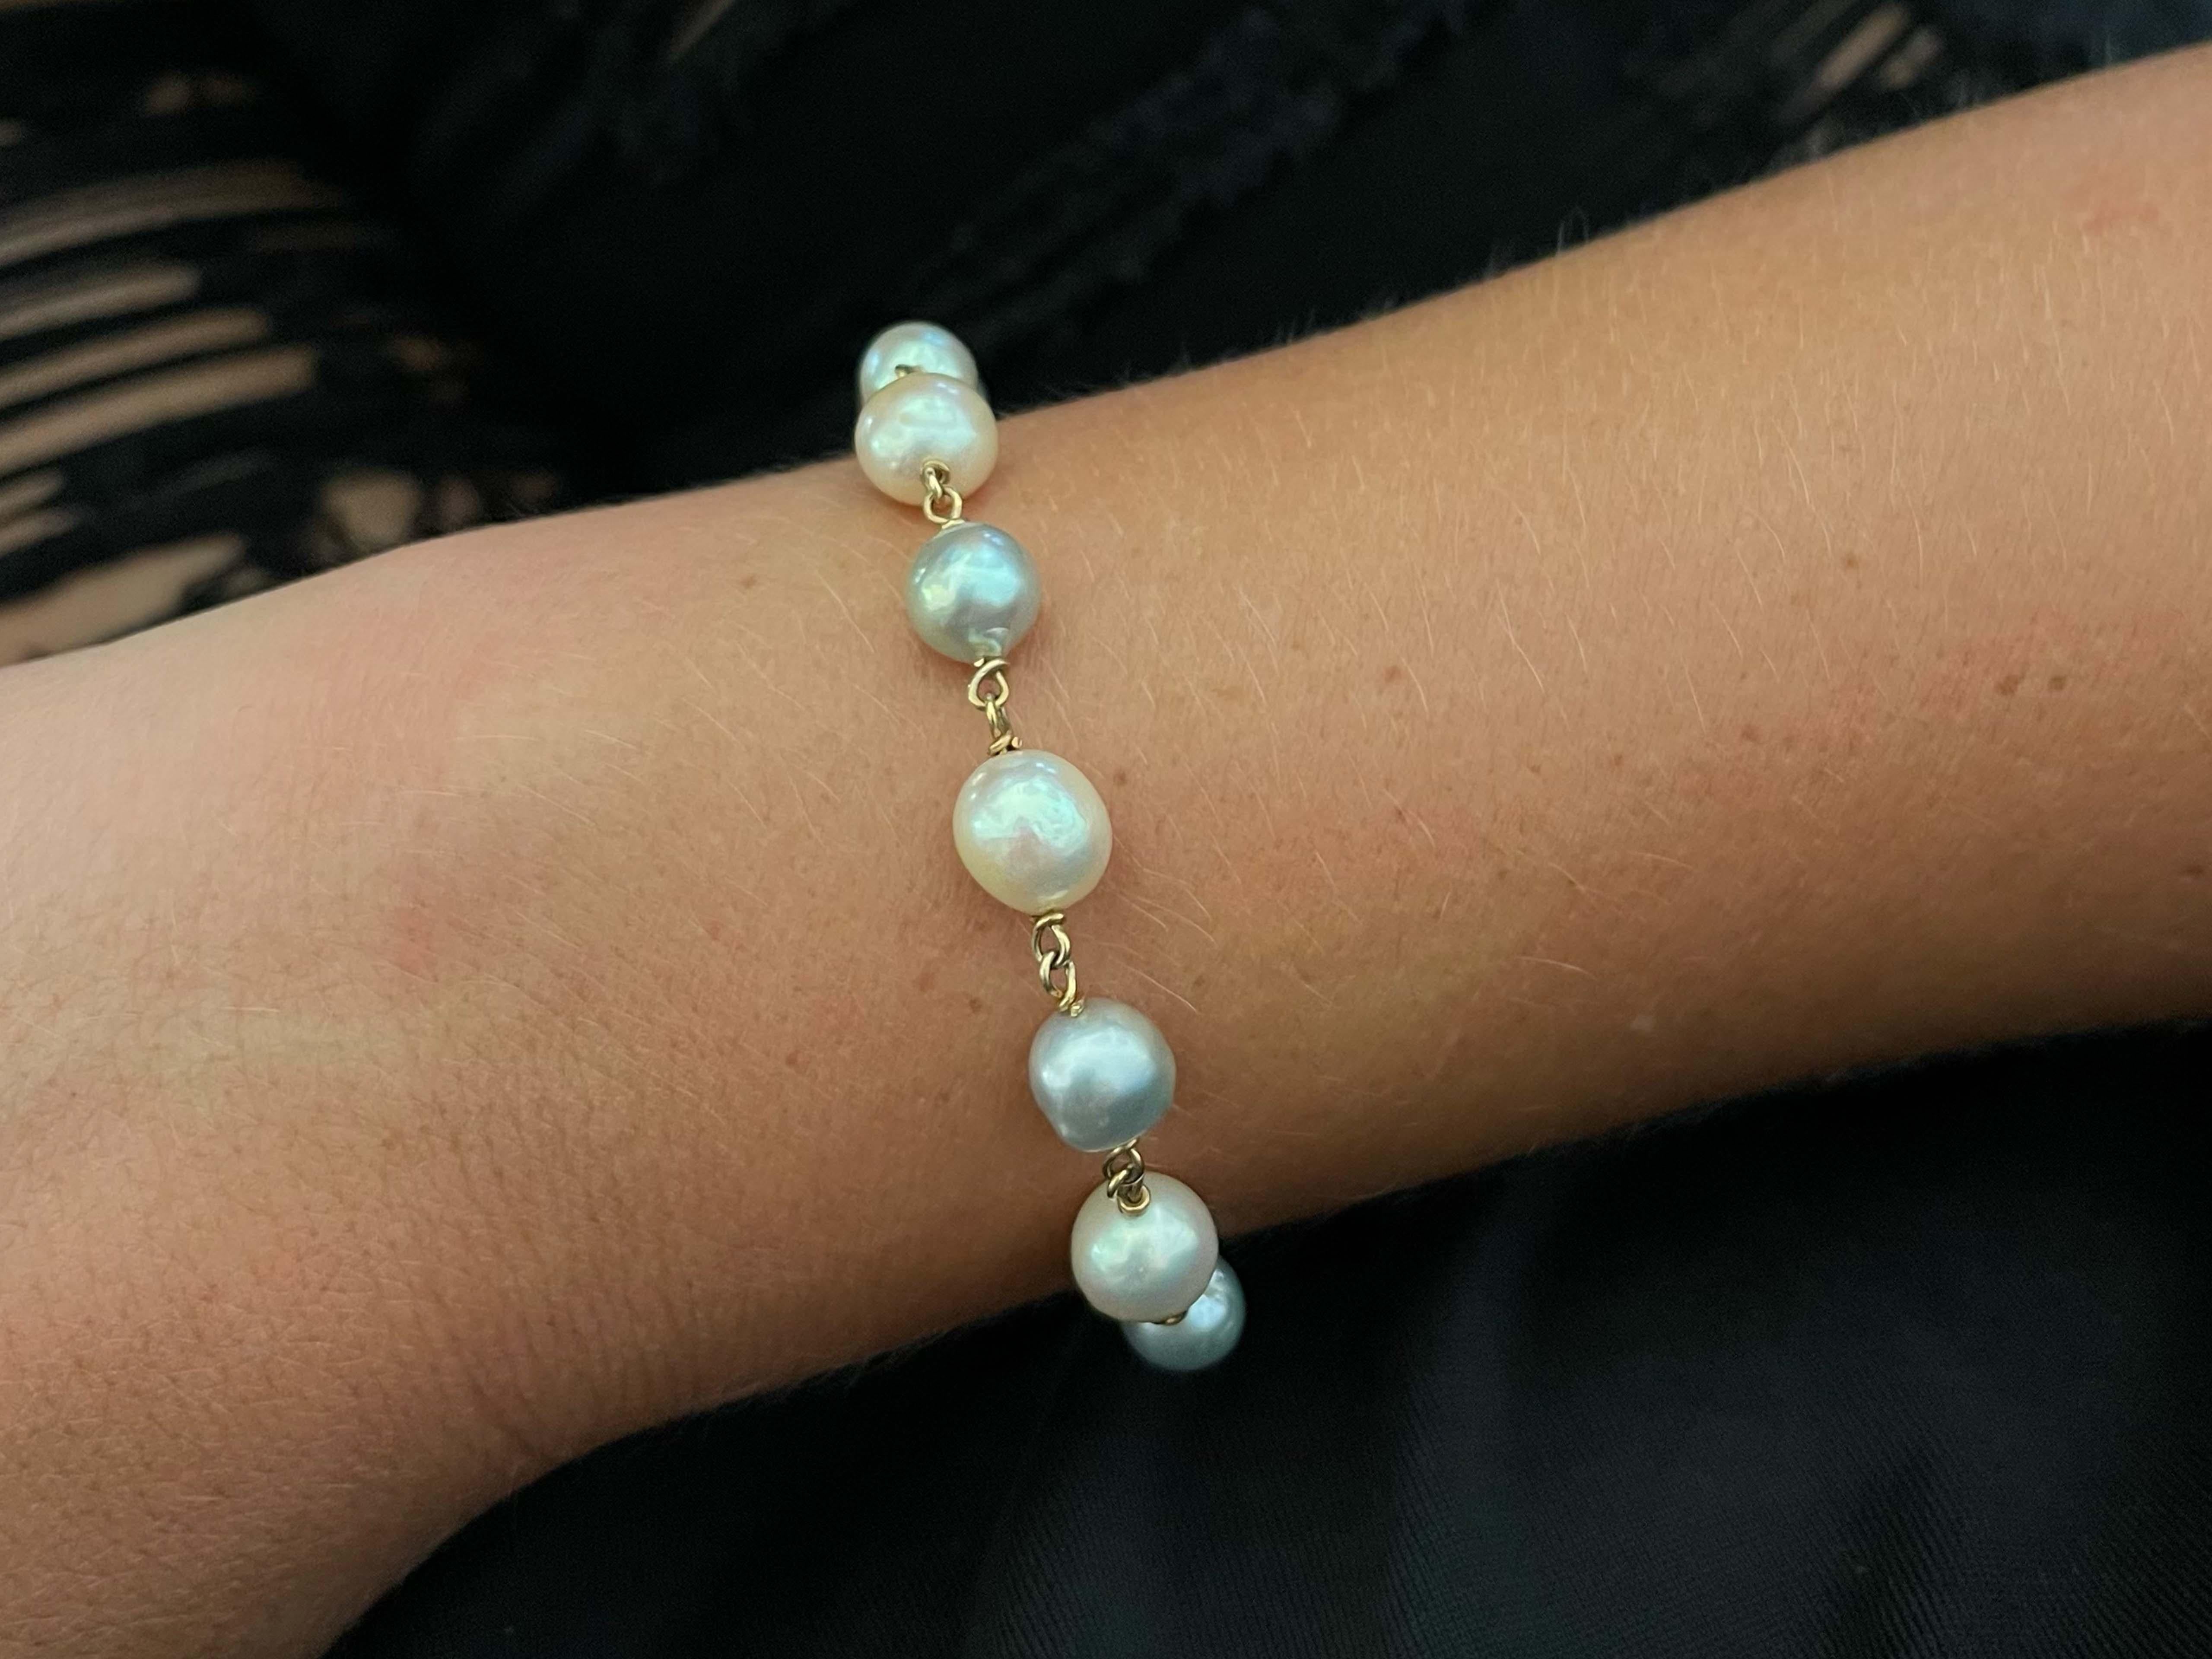 Bracelet Specification:

Total Weight: 13.1 Grams

Pearl Width: 7.2 - 8.8 mm

Bracelet Length: 7 inches

Wrist Size: Fits Up to 6.75 inches 

Pearl Count: 13 baroque pearls

Condition: Preowned, excellent
​
​​Stamped: 